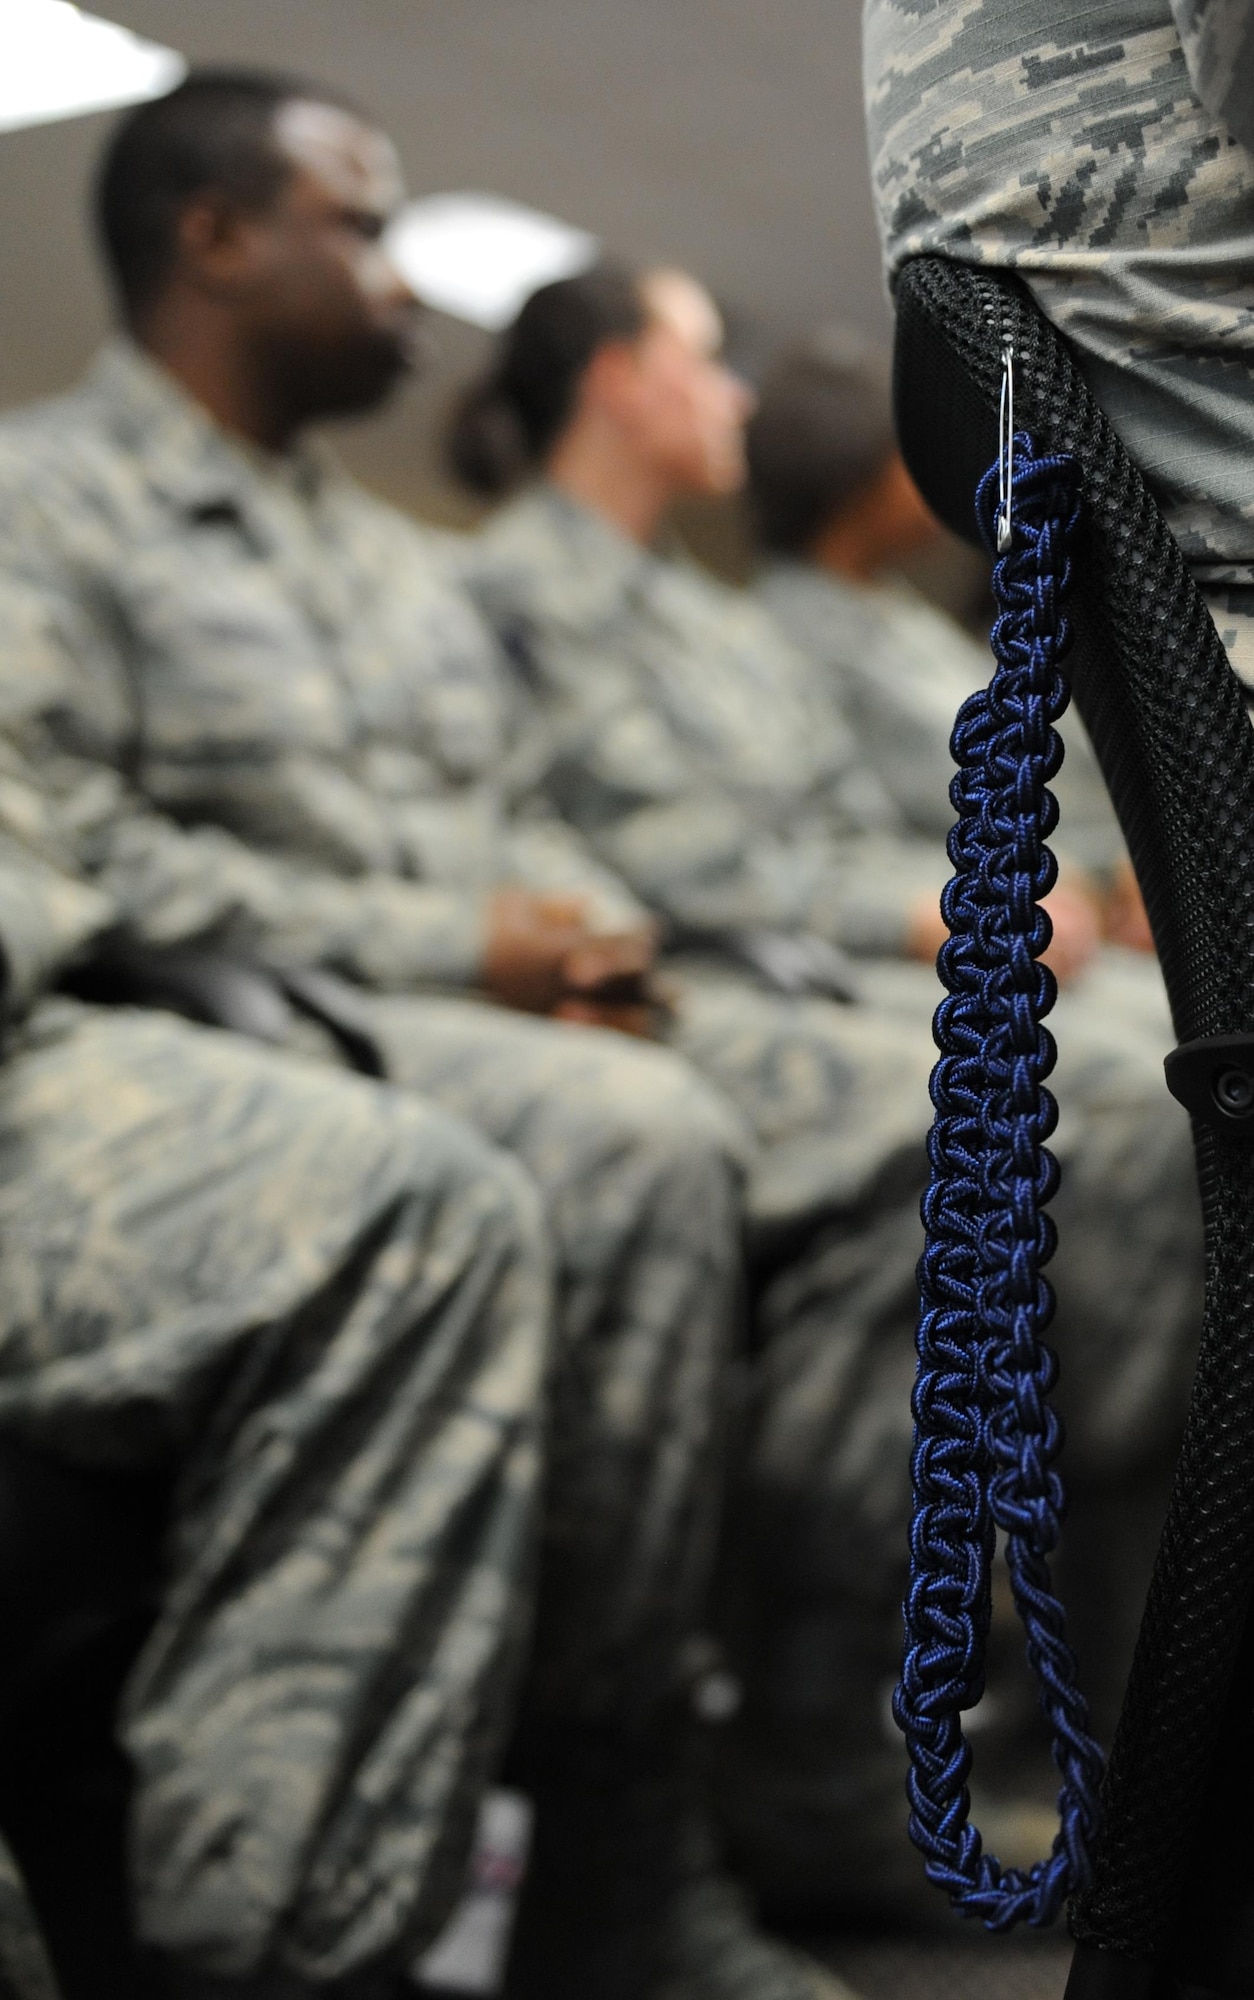 A blue rope hangs on a chair during a graduation ceremony at Lott Hall Feb. 11, 2016, Keesler Air Force Base, Miss. The first selected group of NCOs graduated the military training leader course after attending the nine-day class at Keesler. The program, formerly based out of Joint Base San Antonio-Lackland, Texas, is designed to mentor, train and lead Airmen in technical training as military training leaders. (U.S. Air Force photo by Kemberly Groue)